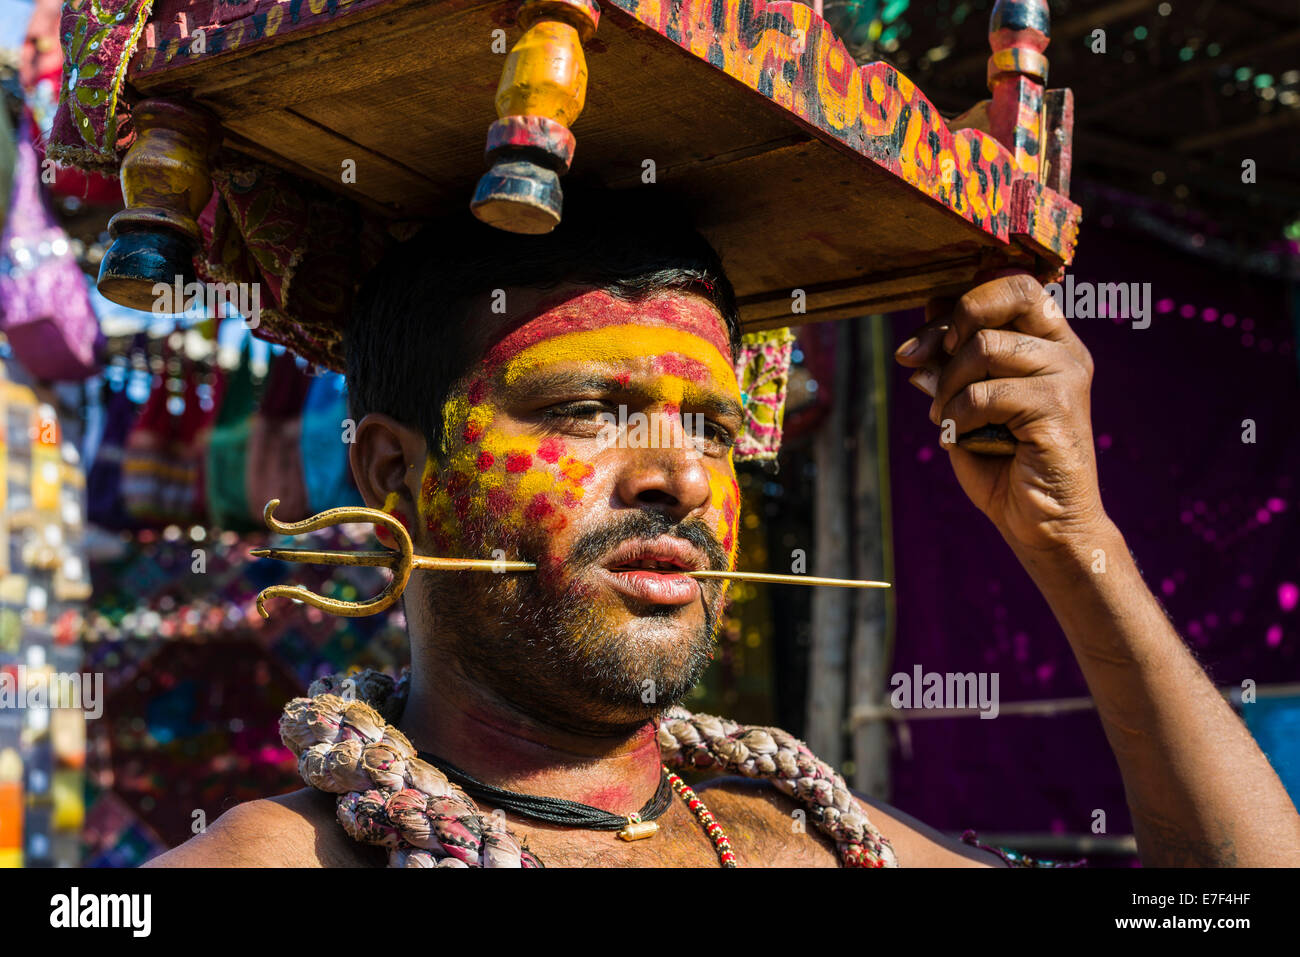 A man with a small brass trident pierced through his cheek is collecting money for religious purposes at the weekly flea market Stock Photo